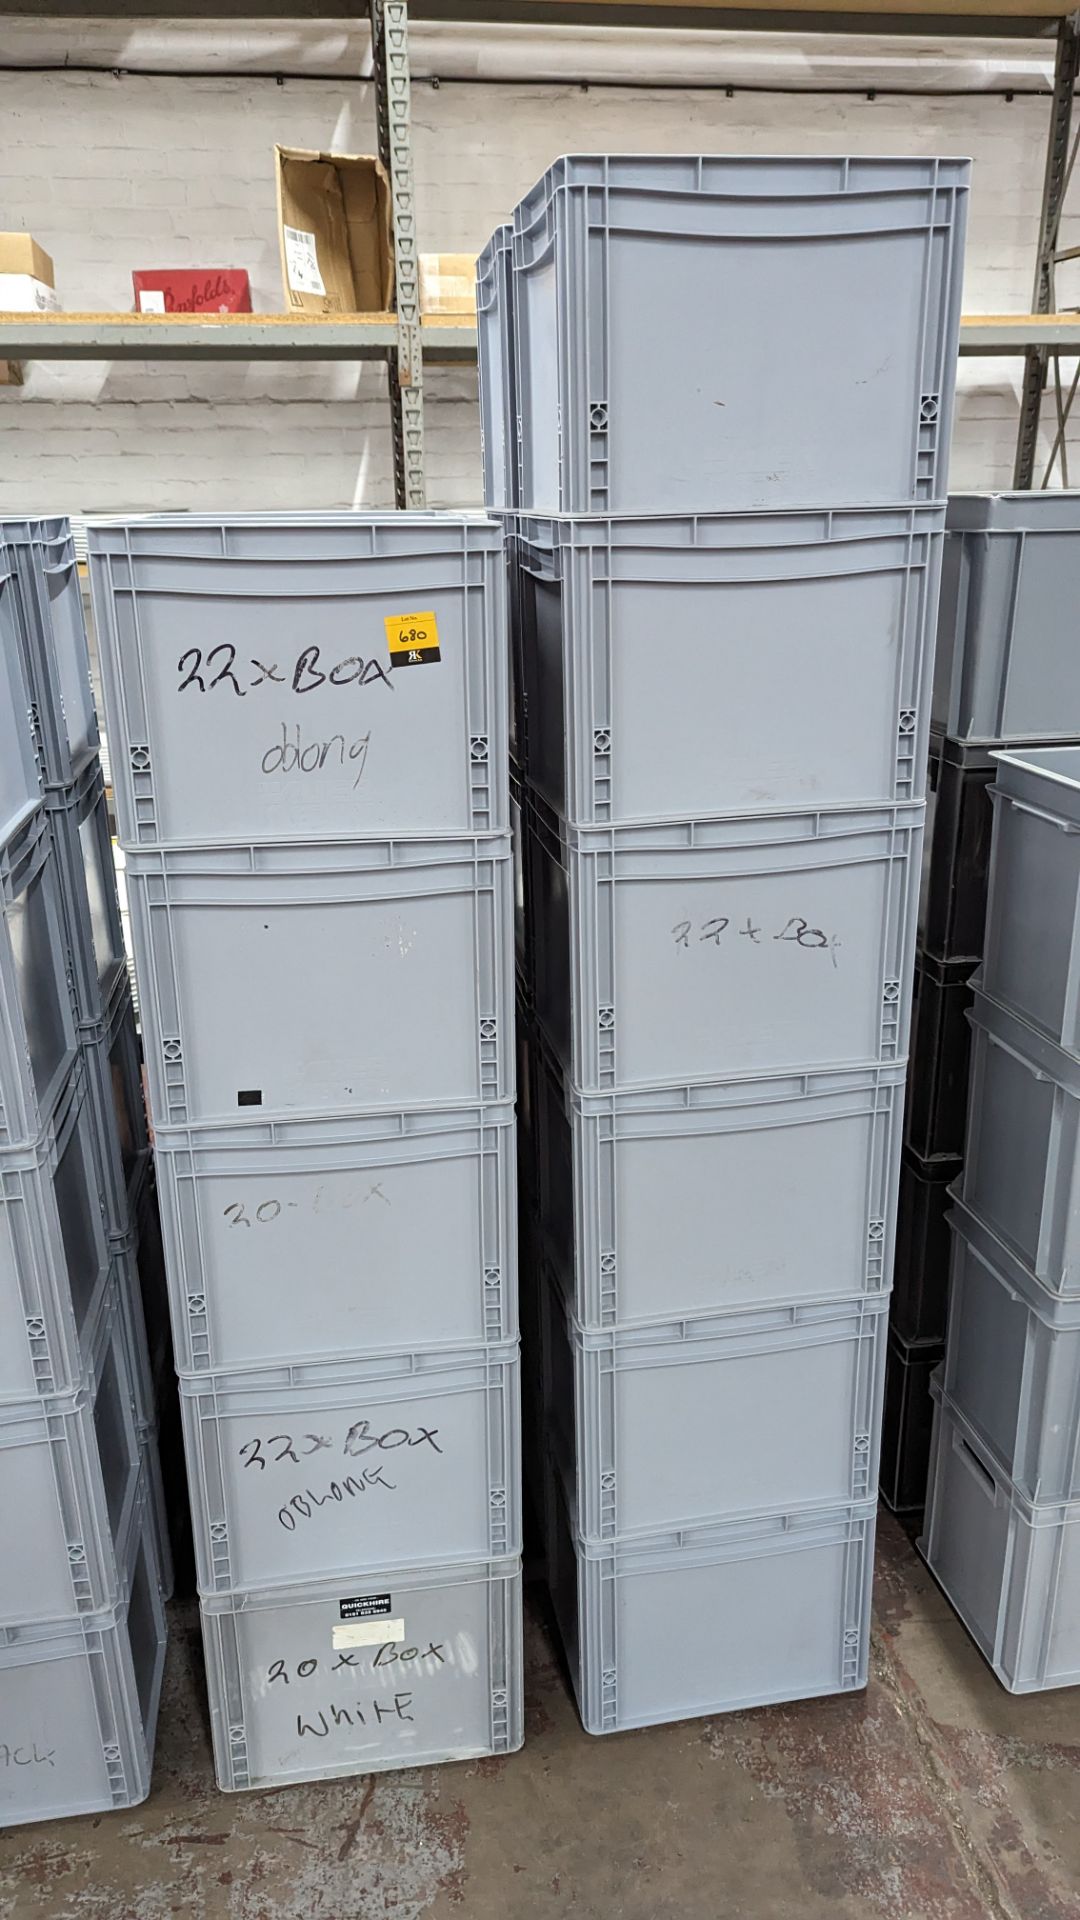 22 off matching pale grey stacking plastic crates each measuring approximately 400mm x 300mm x 300mm - Image 2 of 3